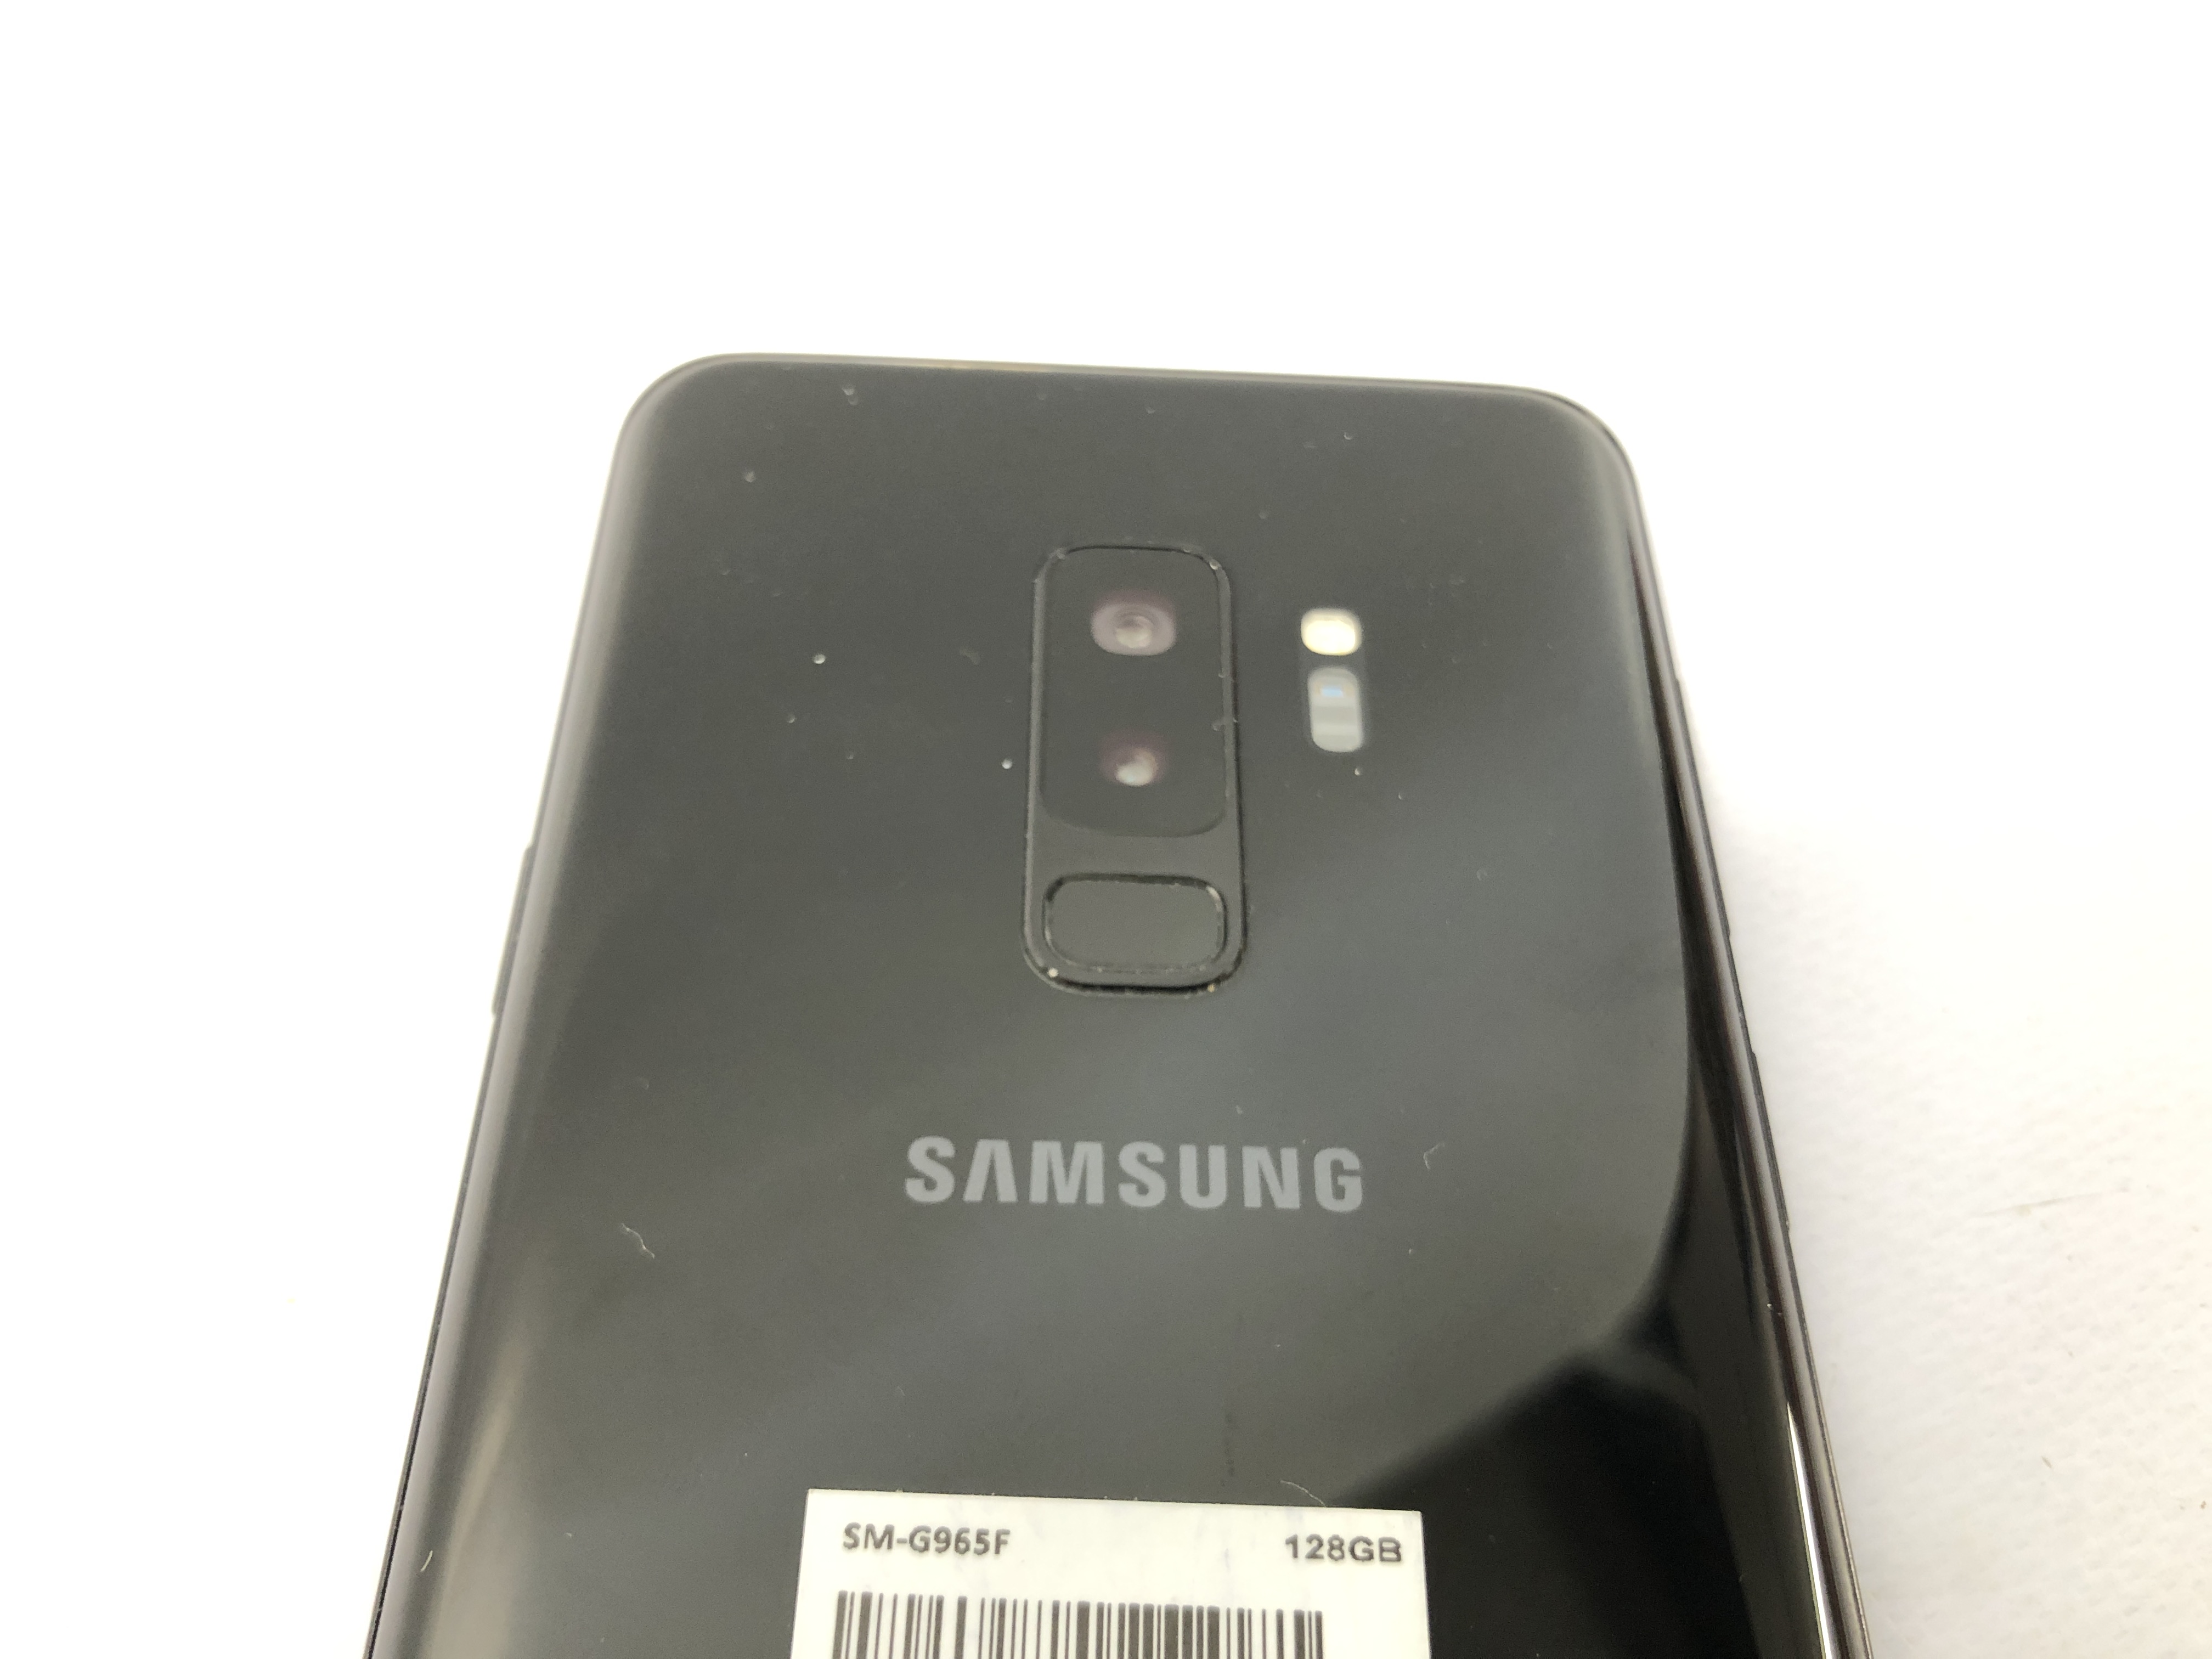 SAMSUNG GALAXY S9+ SMARTPHONE BOXED WITH ACCESSORIES 128GB MODEL SM-G965F - SOLD AS SEEN - Image 7 of 10